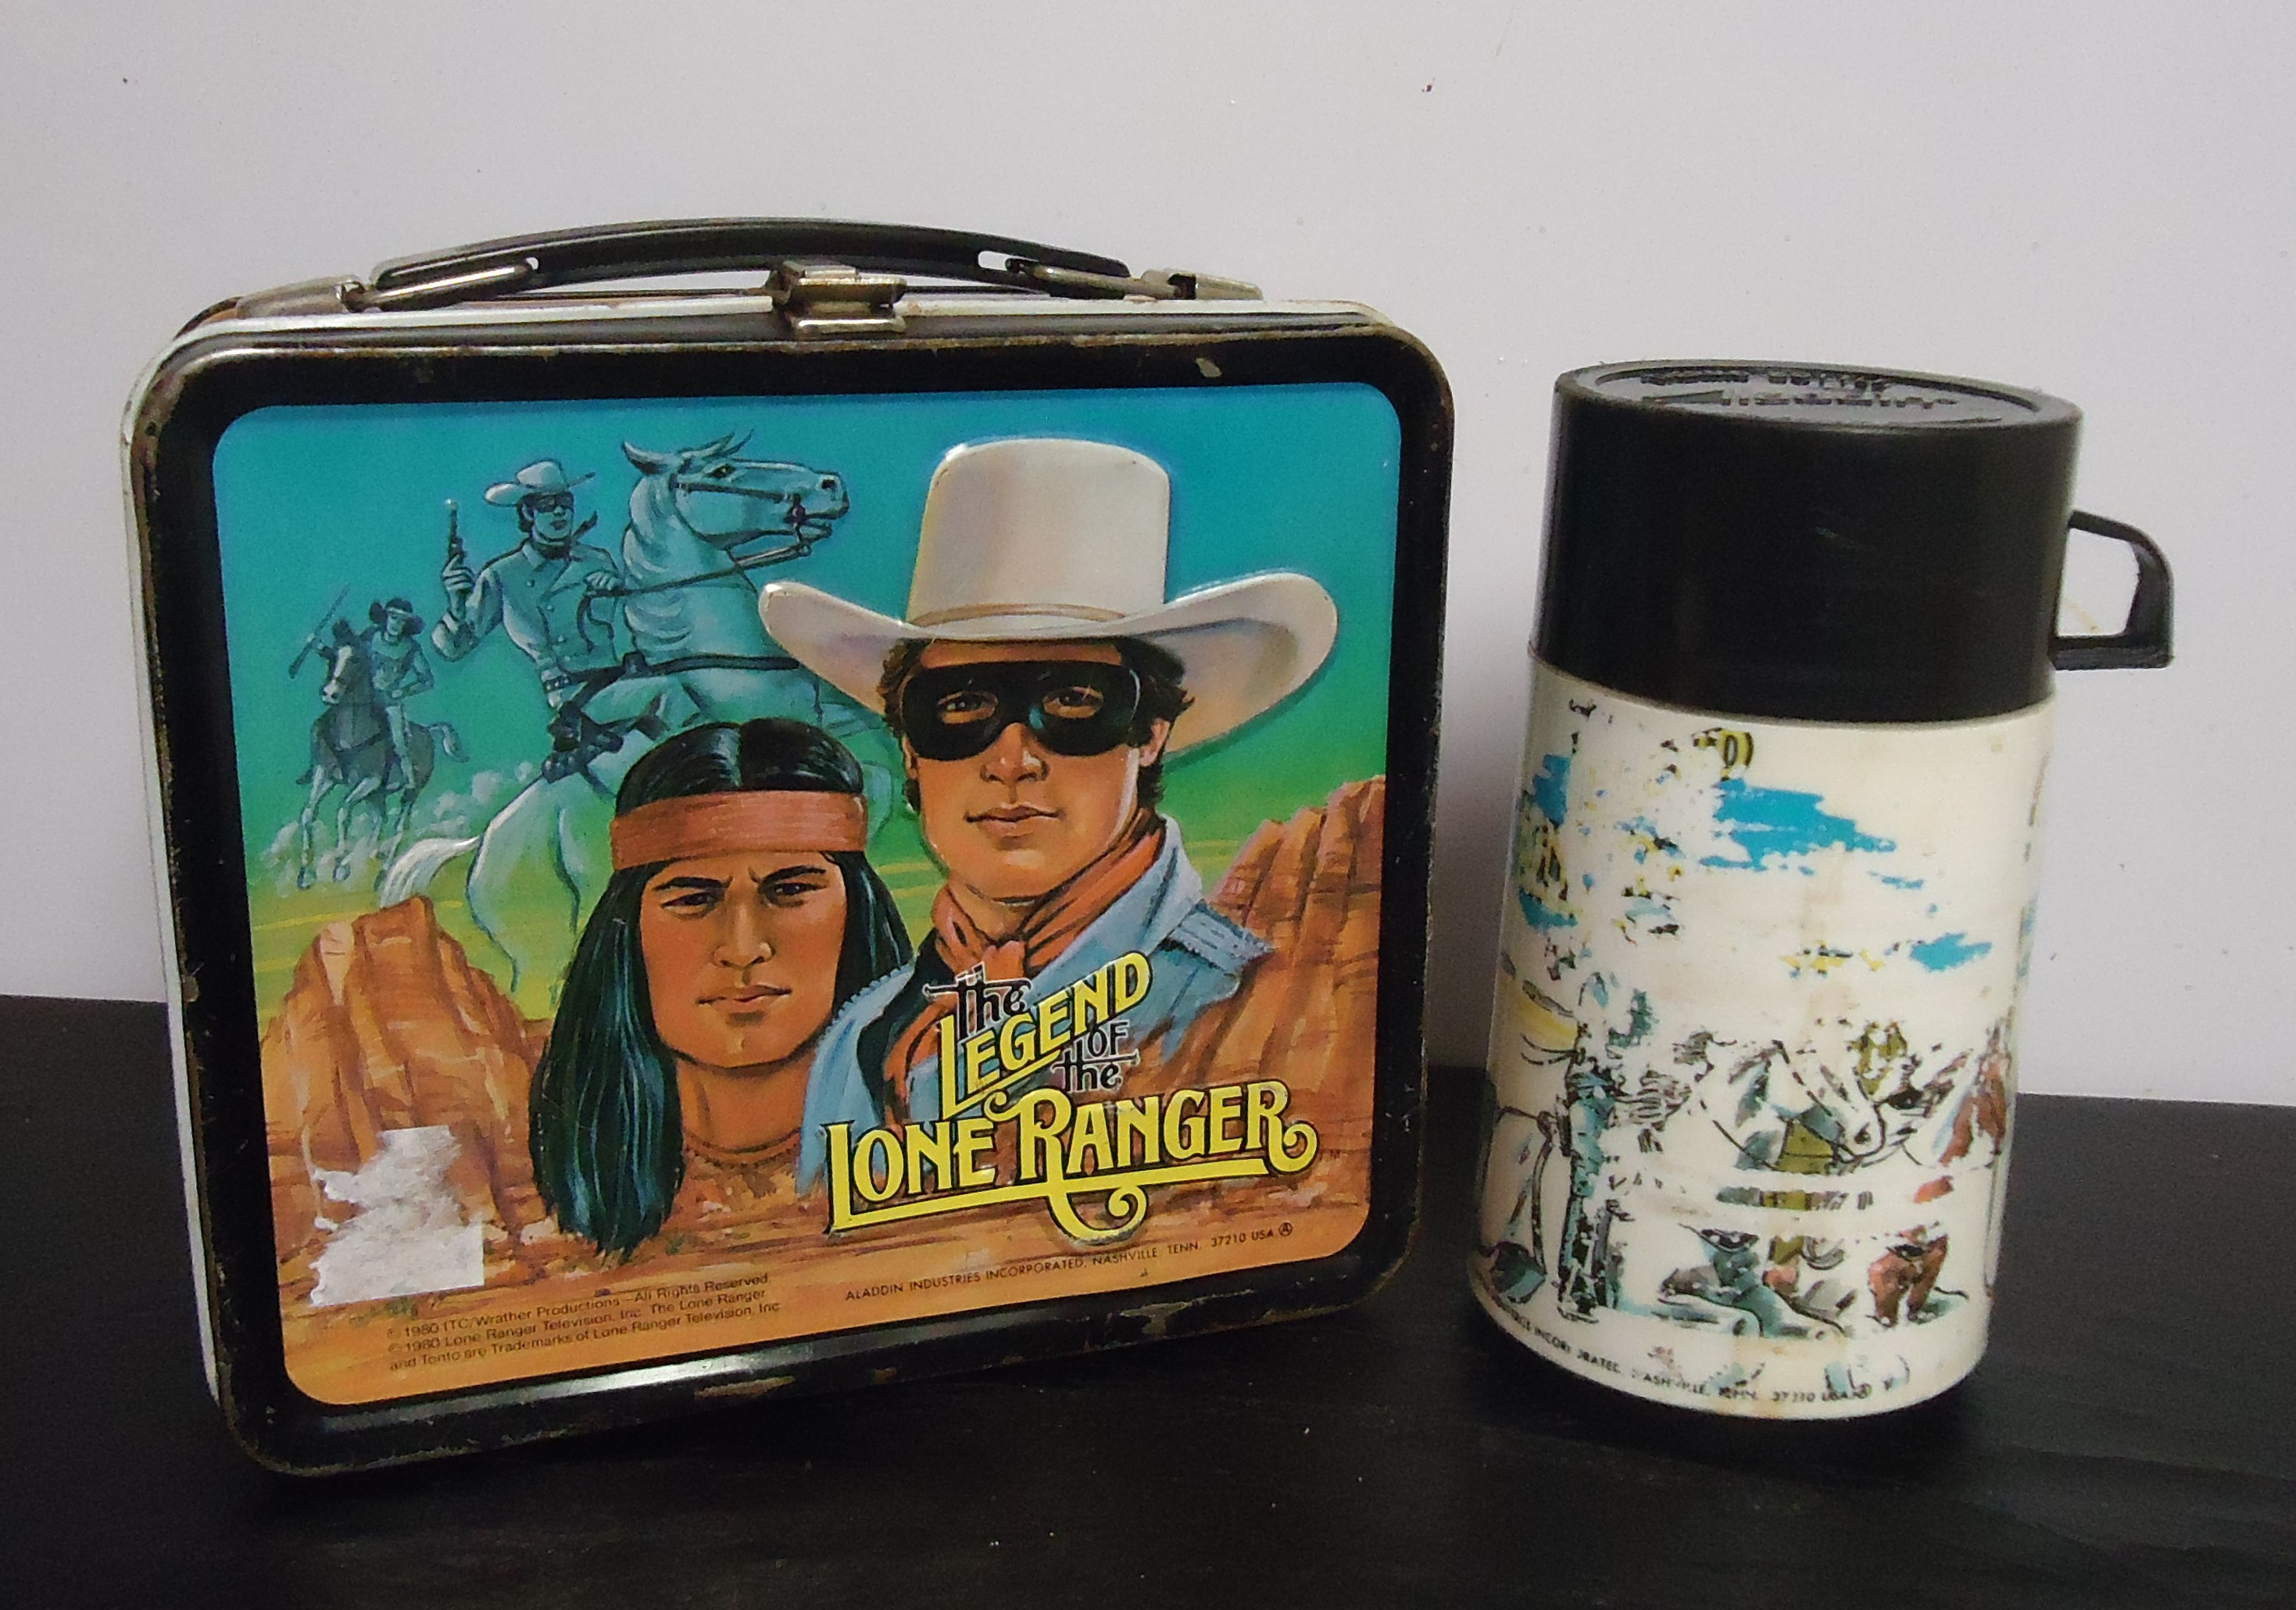 (4) "The Long Ranger"
Metal Lunch Box W/ Thermos
$50.00